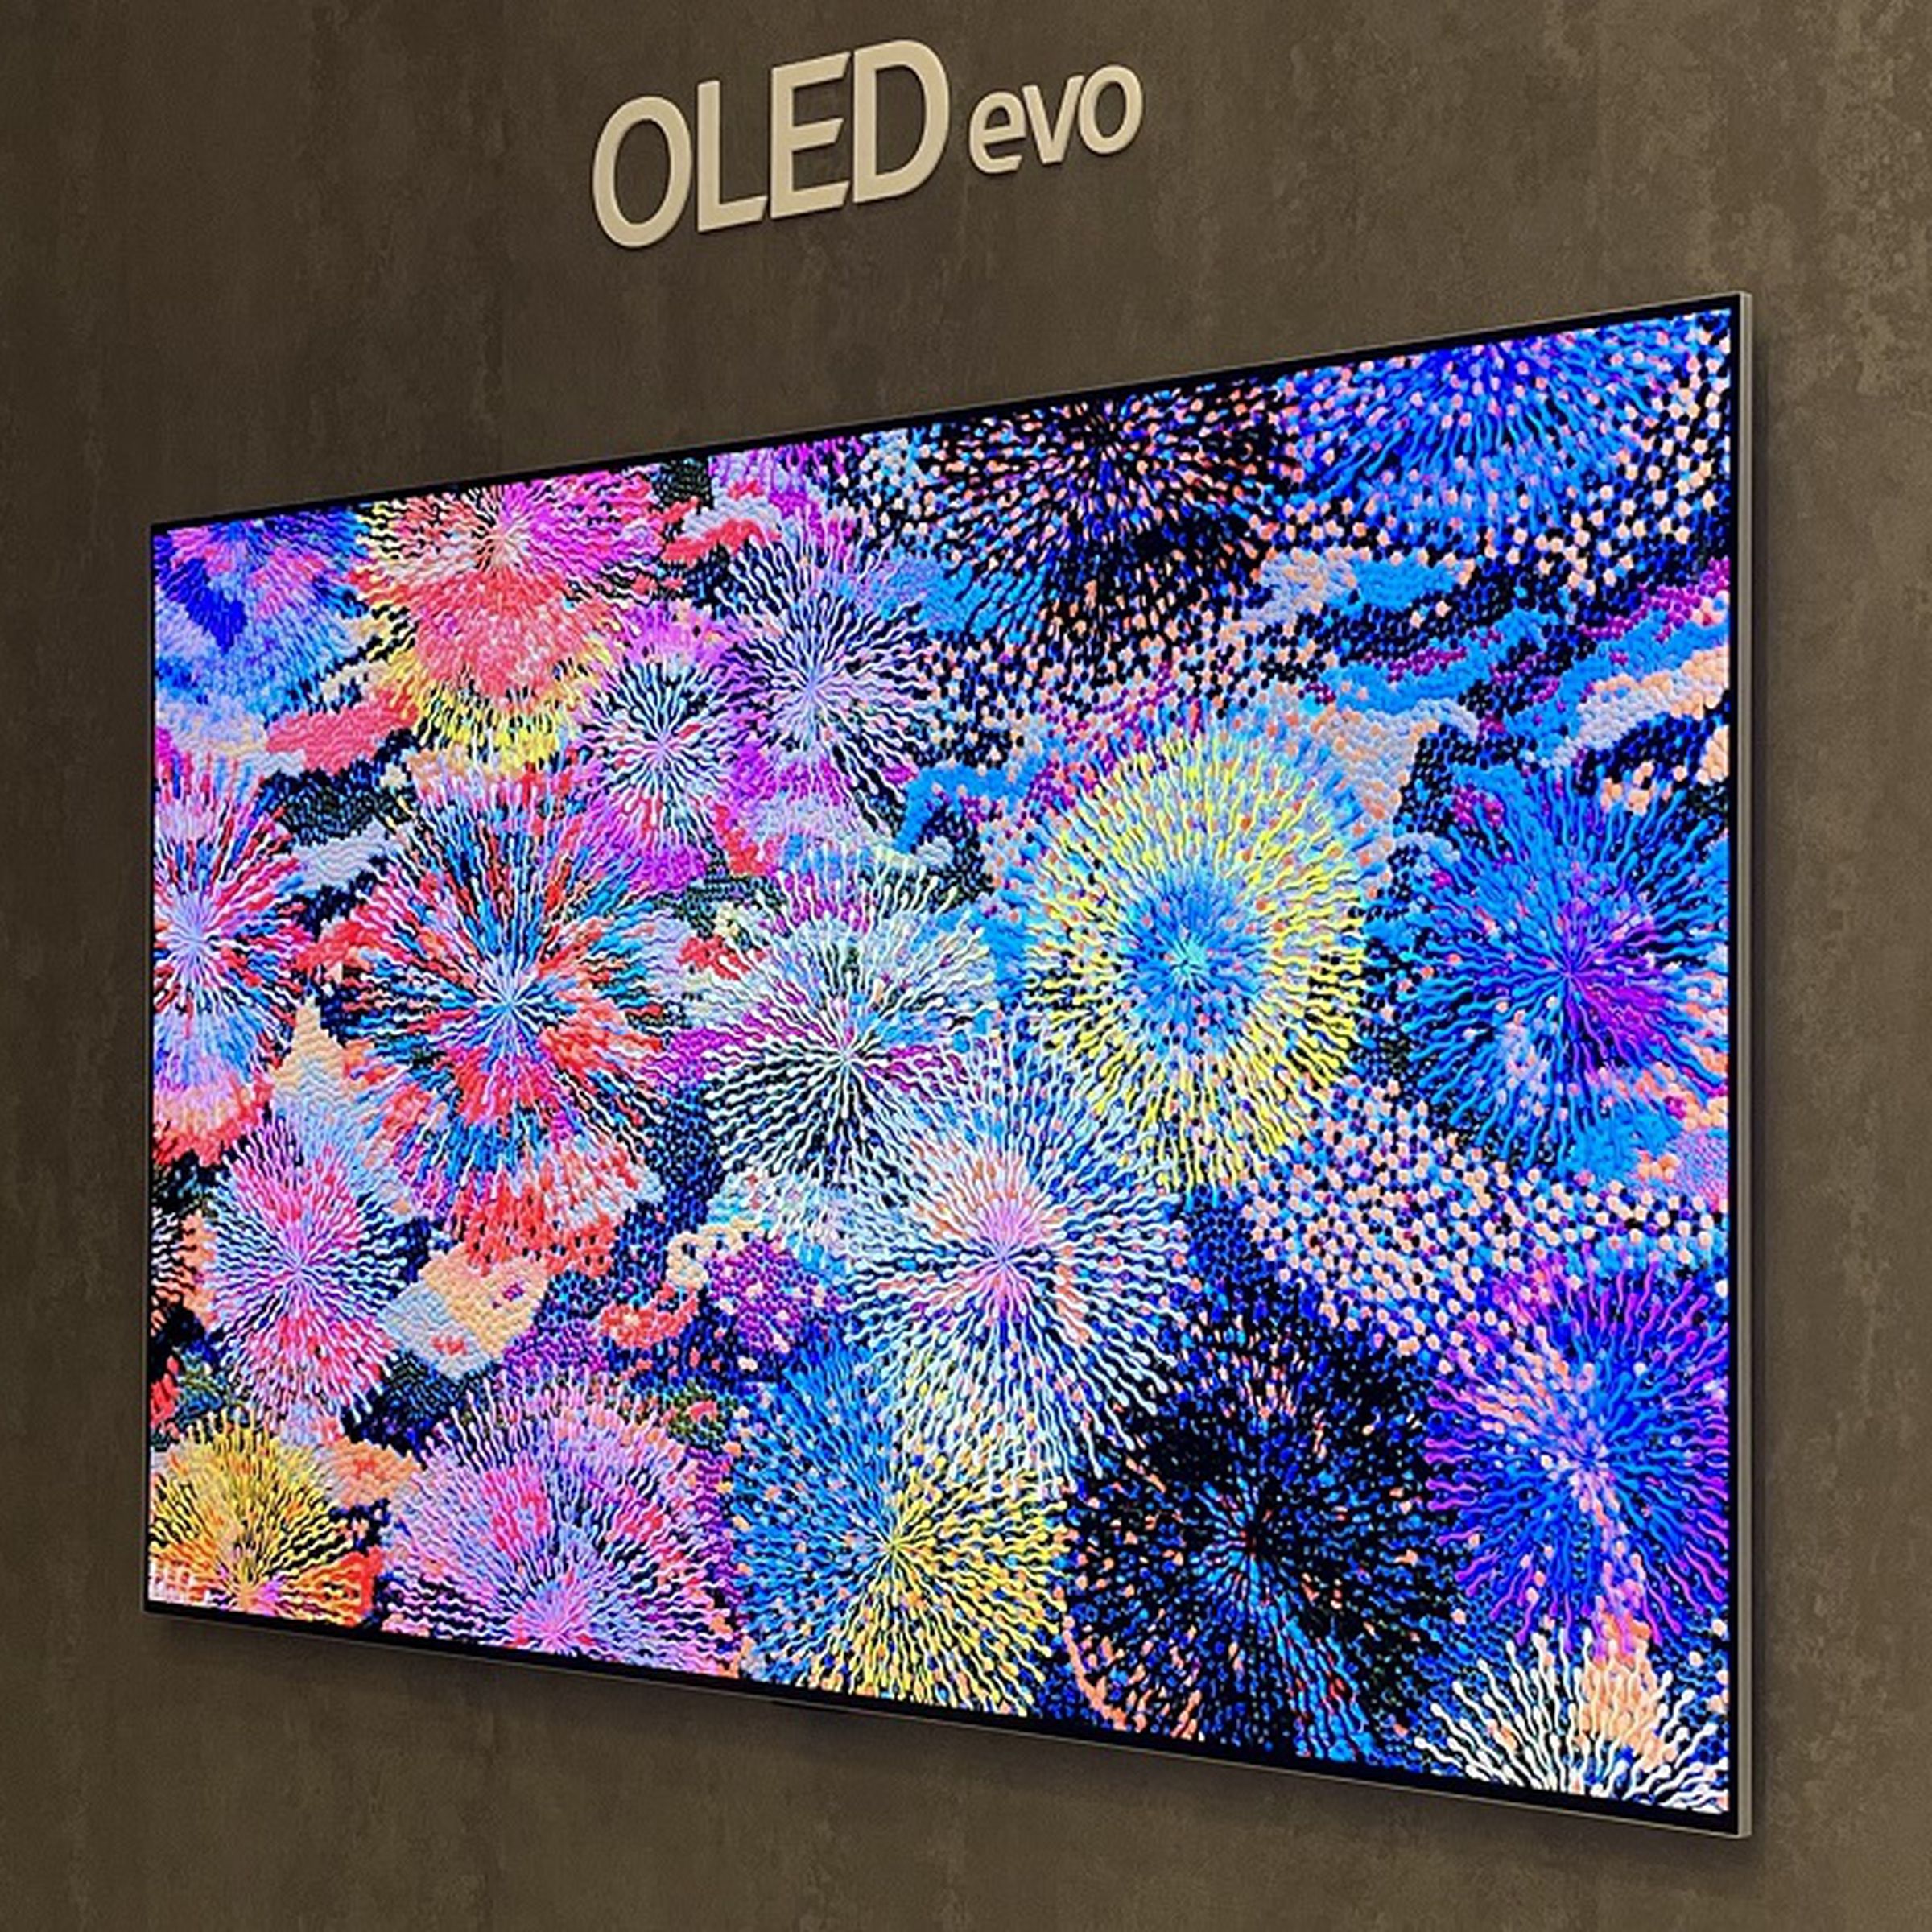 An image of the LG G3 OLED TV.